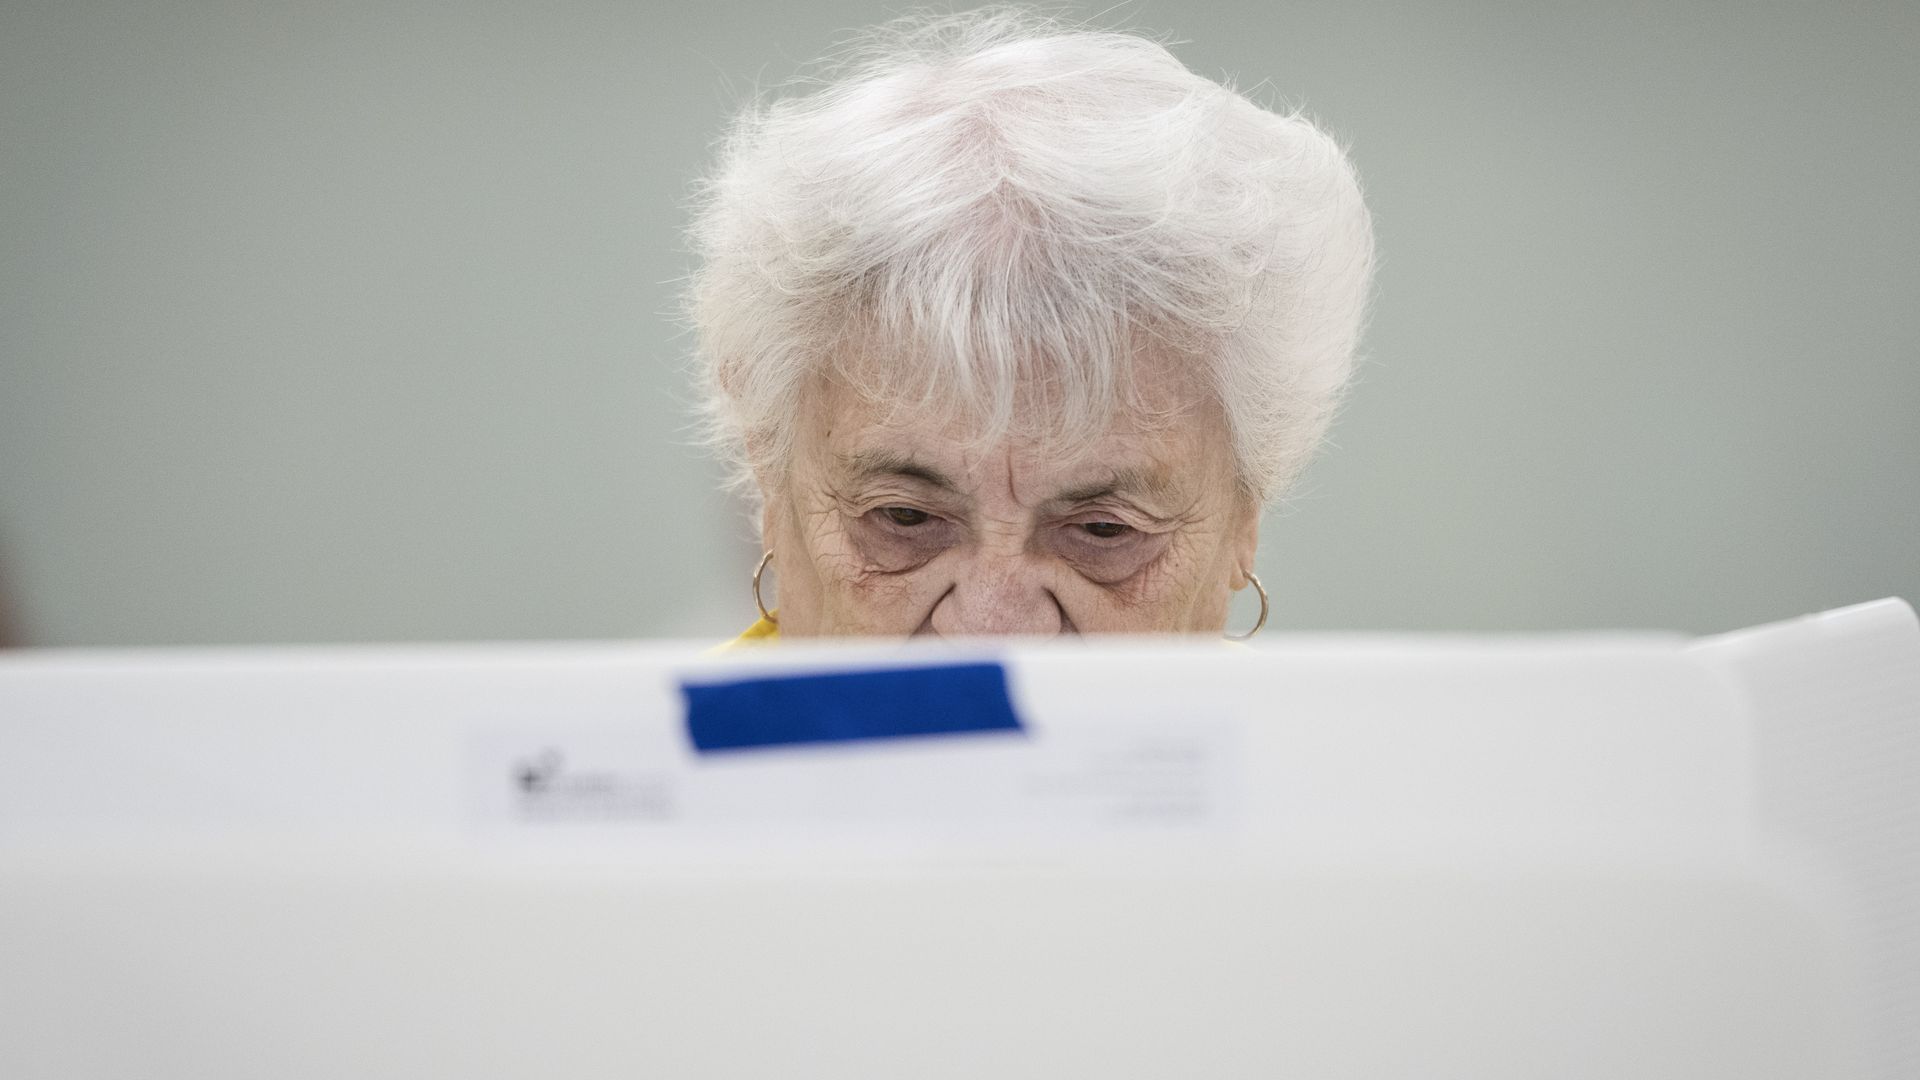 A woman casts a ballot in Ohio.